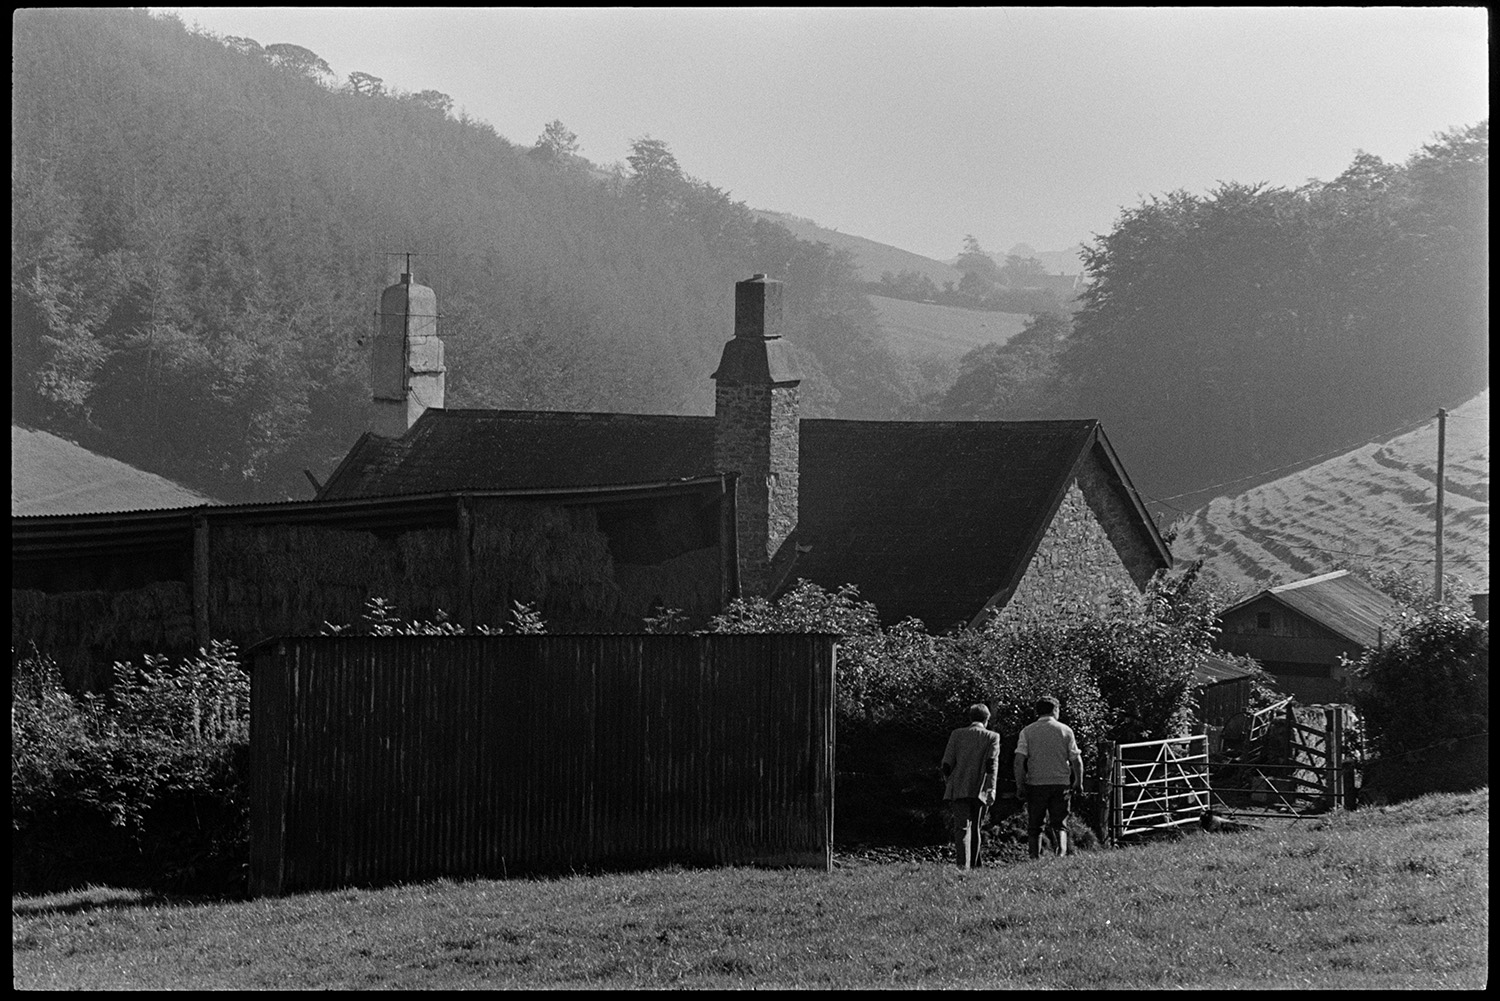 Doctor on his round visiting farm on moor. 
[Doctor Richard Westcott visiting a patient on a farm on Exmoor. He is walking with another man through a field towards the farmhouse. A barn with hay bales is also visible.]